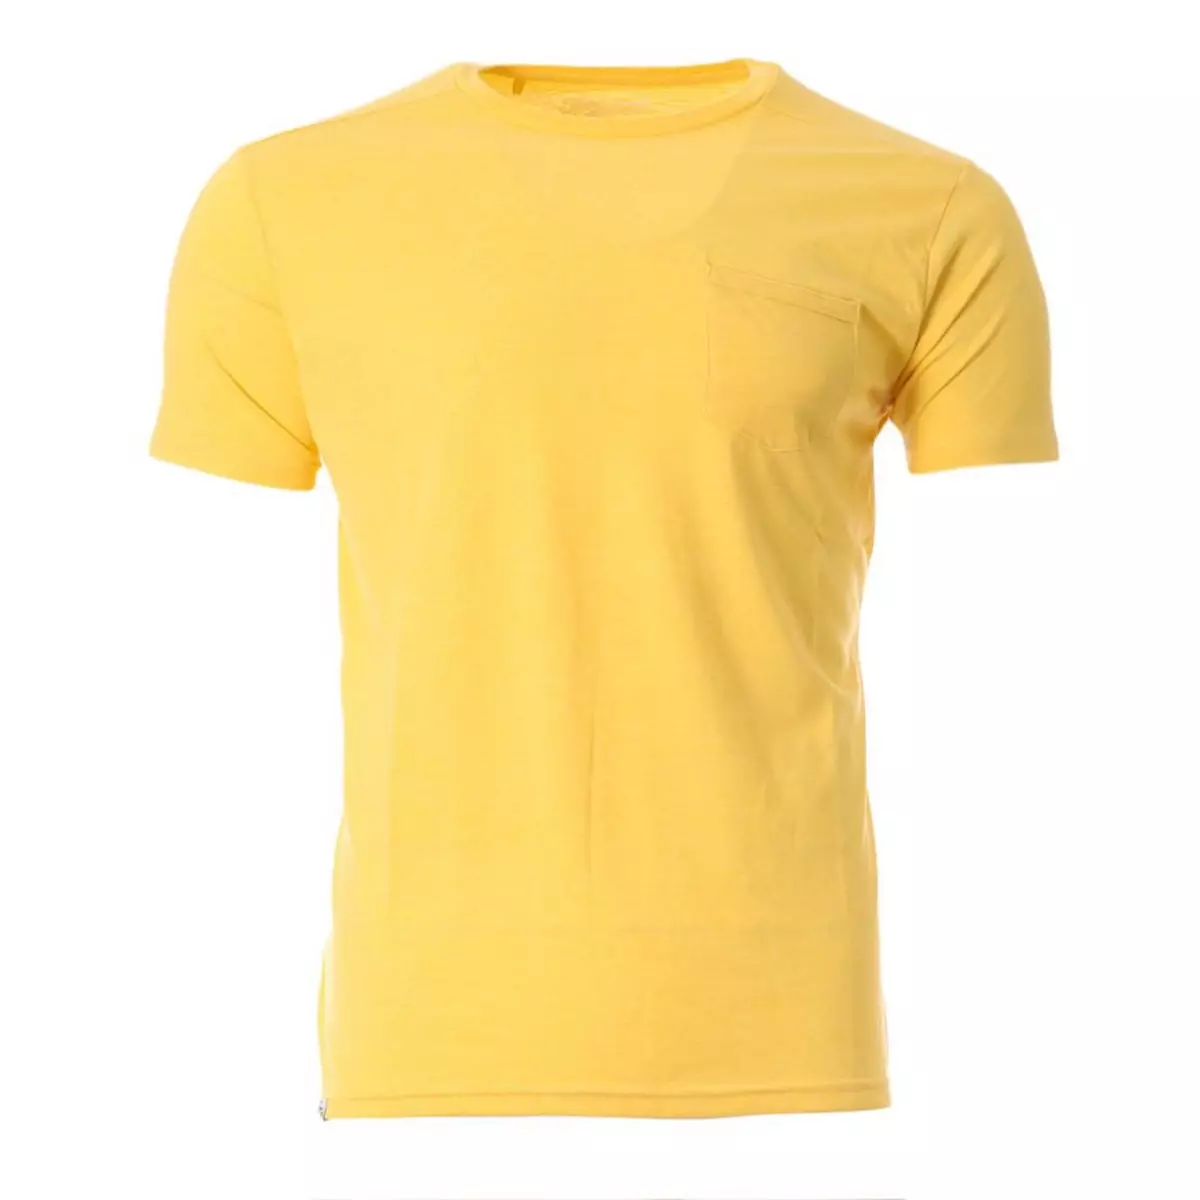 RMS 26 T-shirt Jaune Homme RMS26 1071